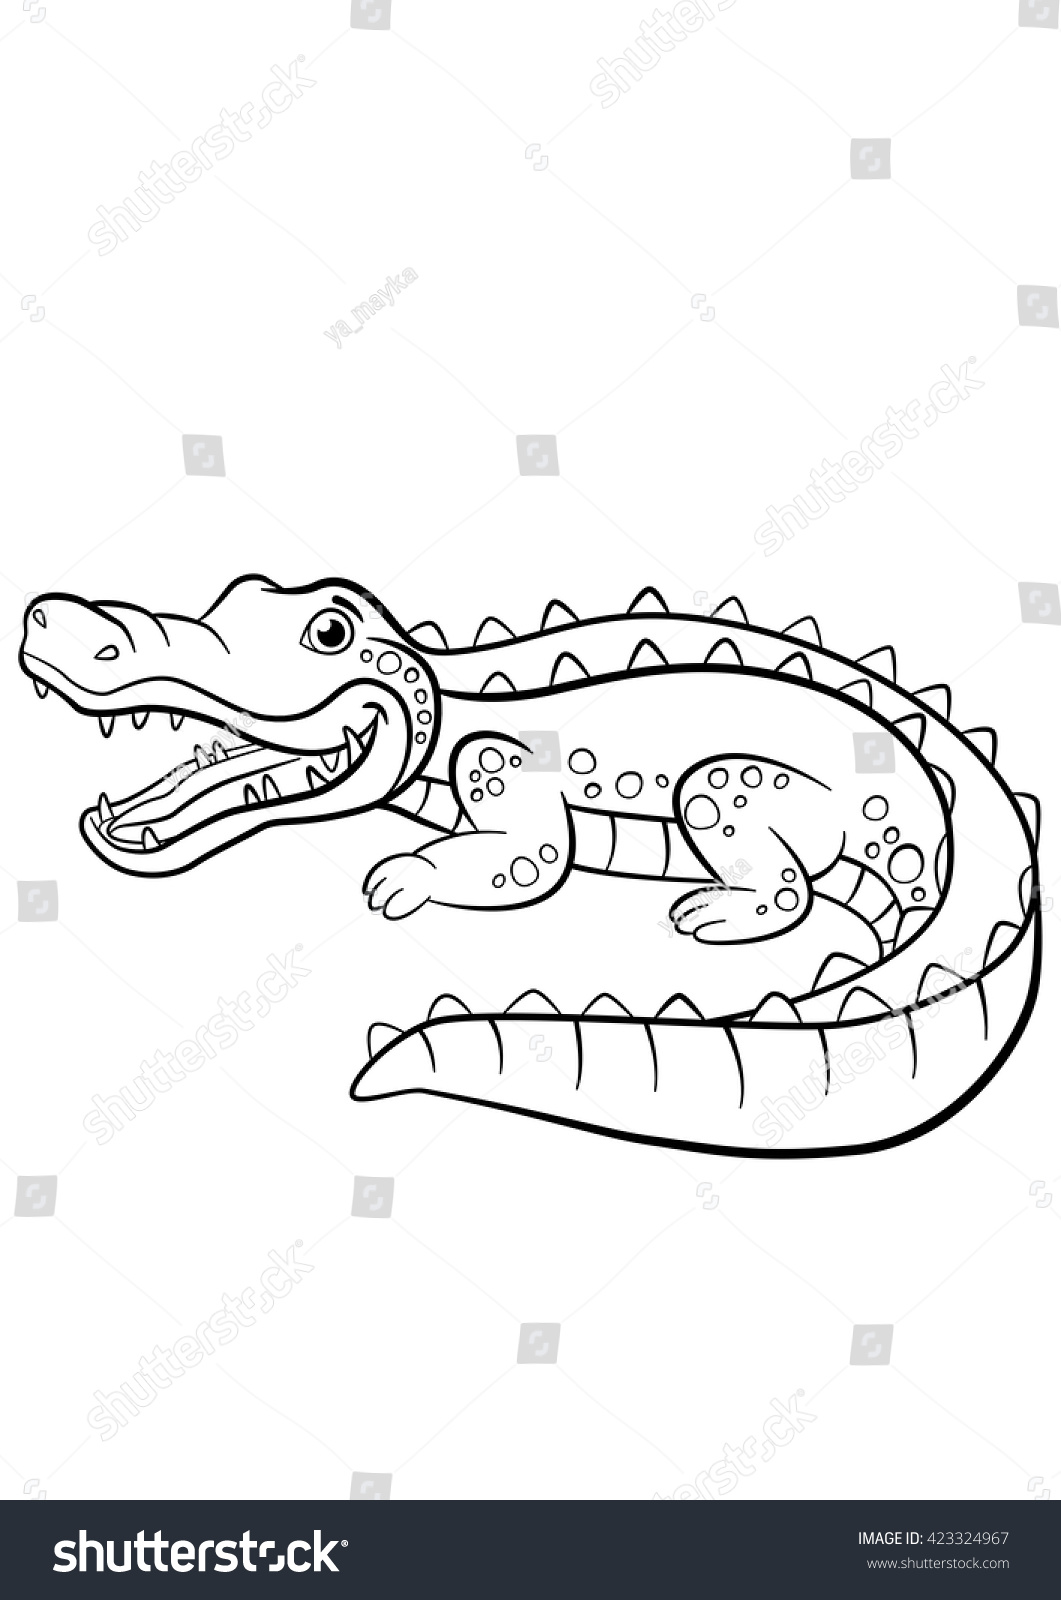 Coloring Pages Animals Mother Alligator Her Stock Vector Royalty ...